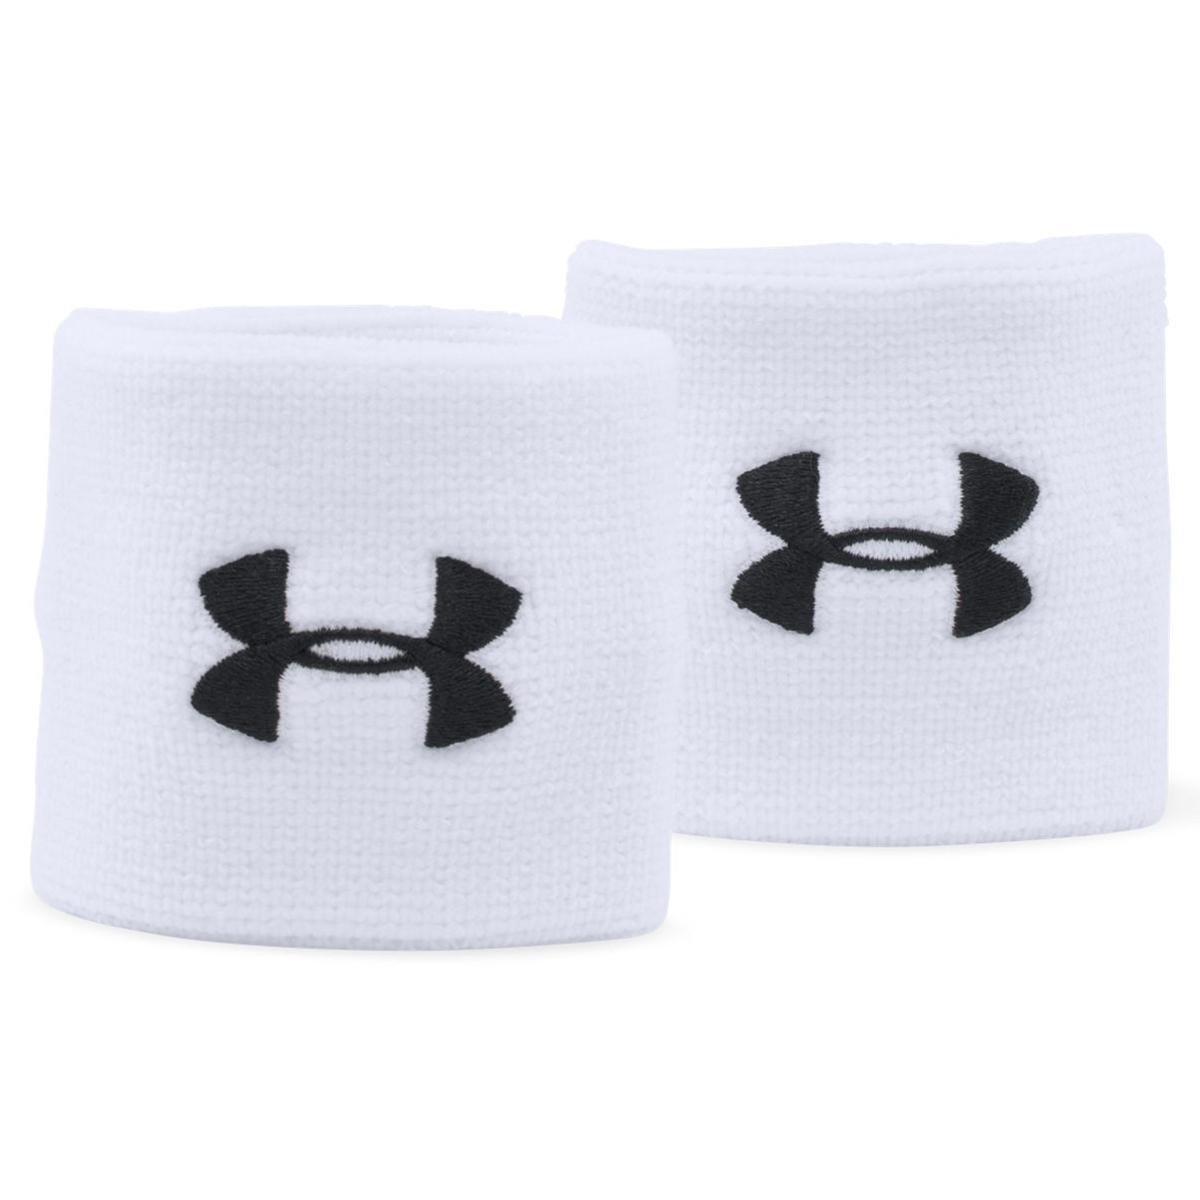 Under Armour Men's Performance Wristbands, 4-Pack